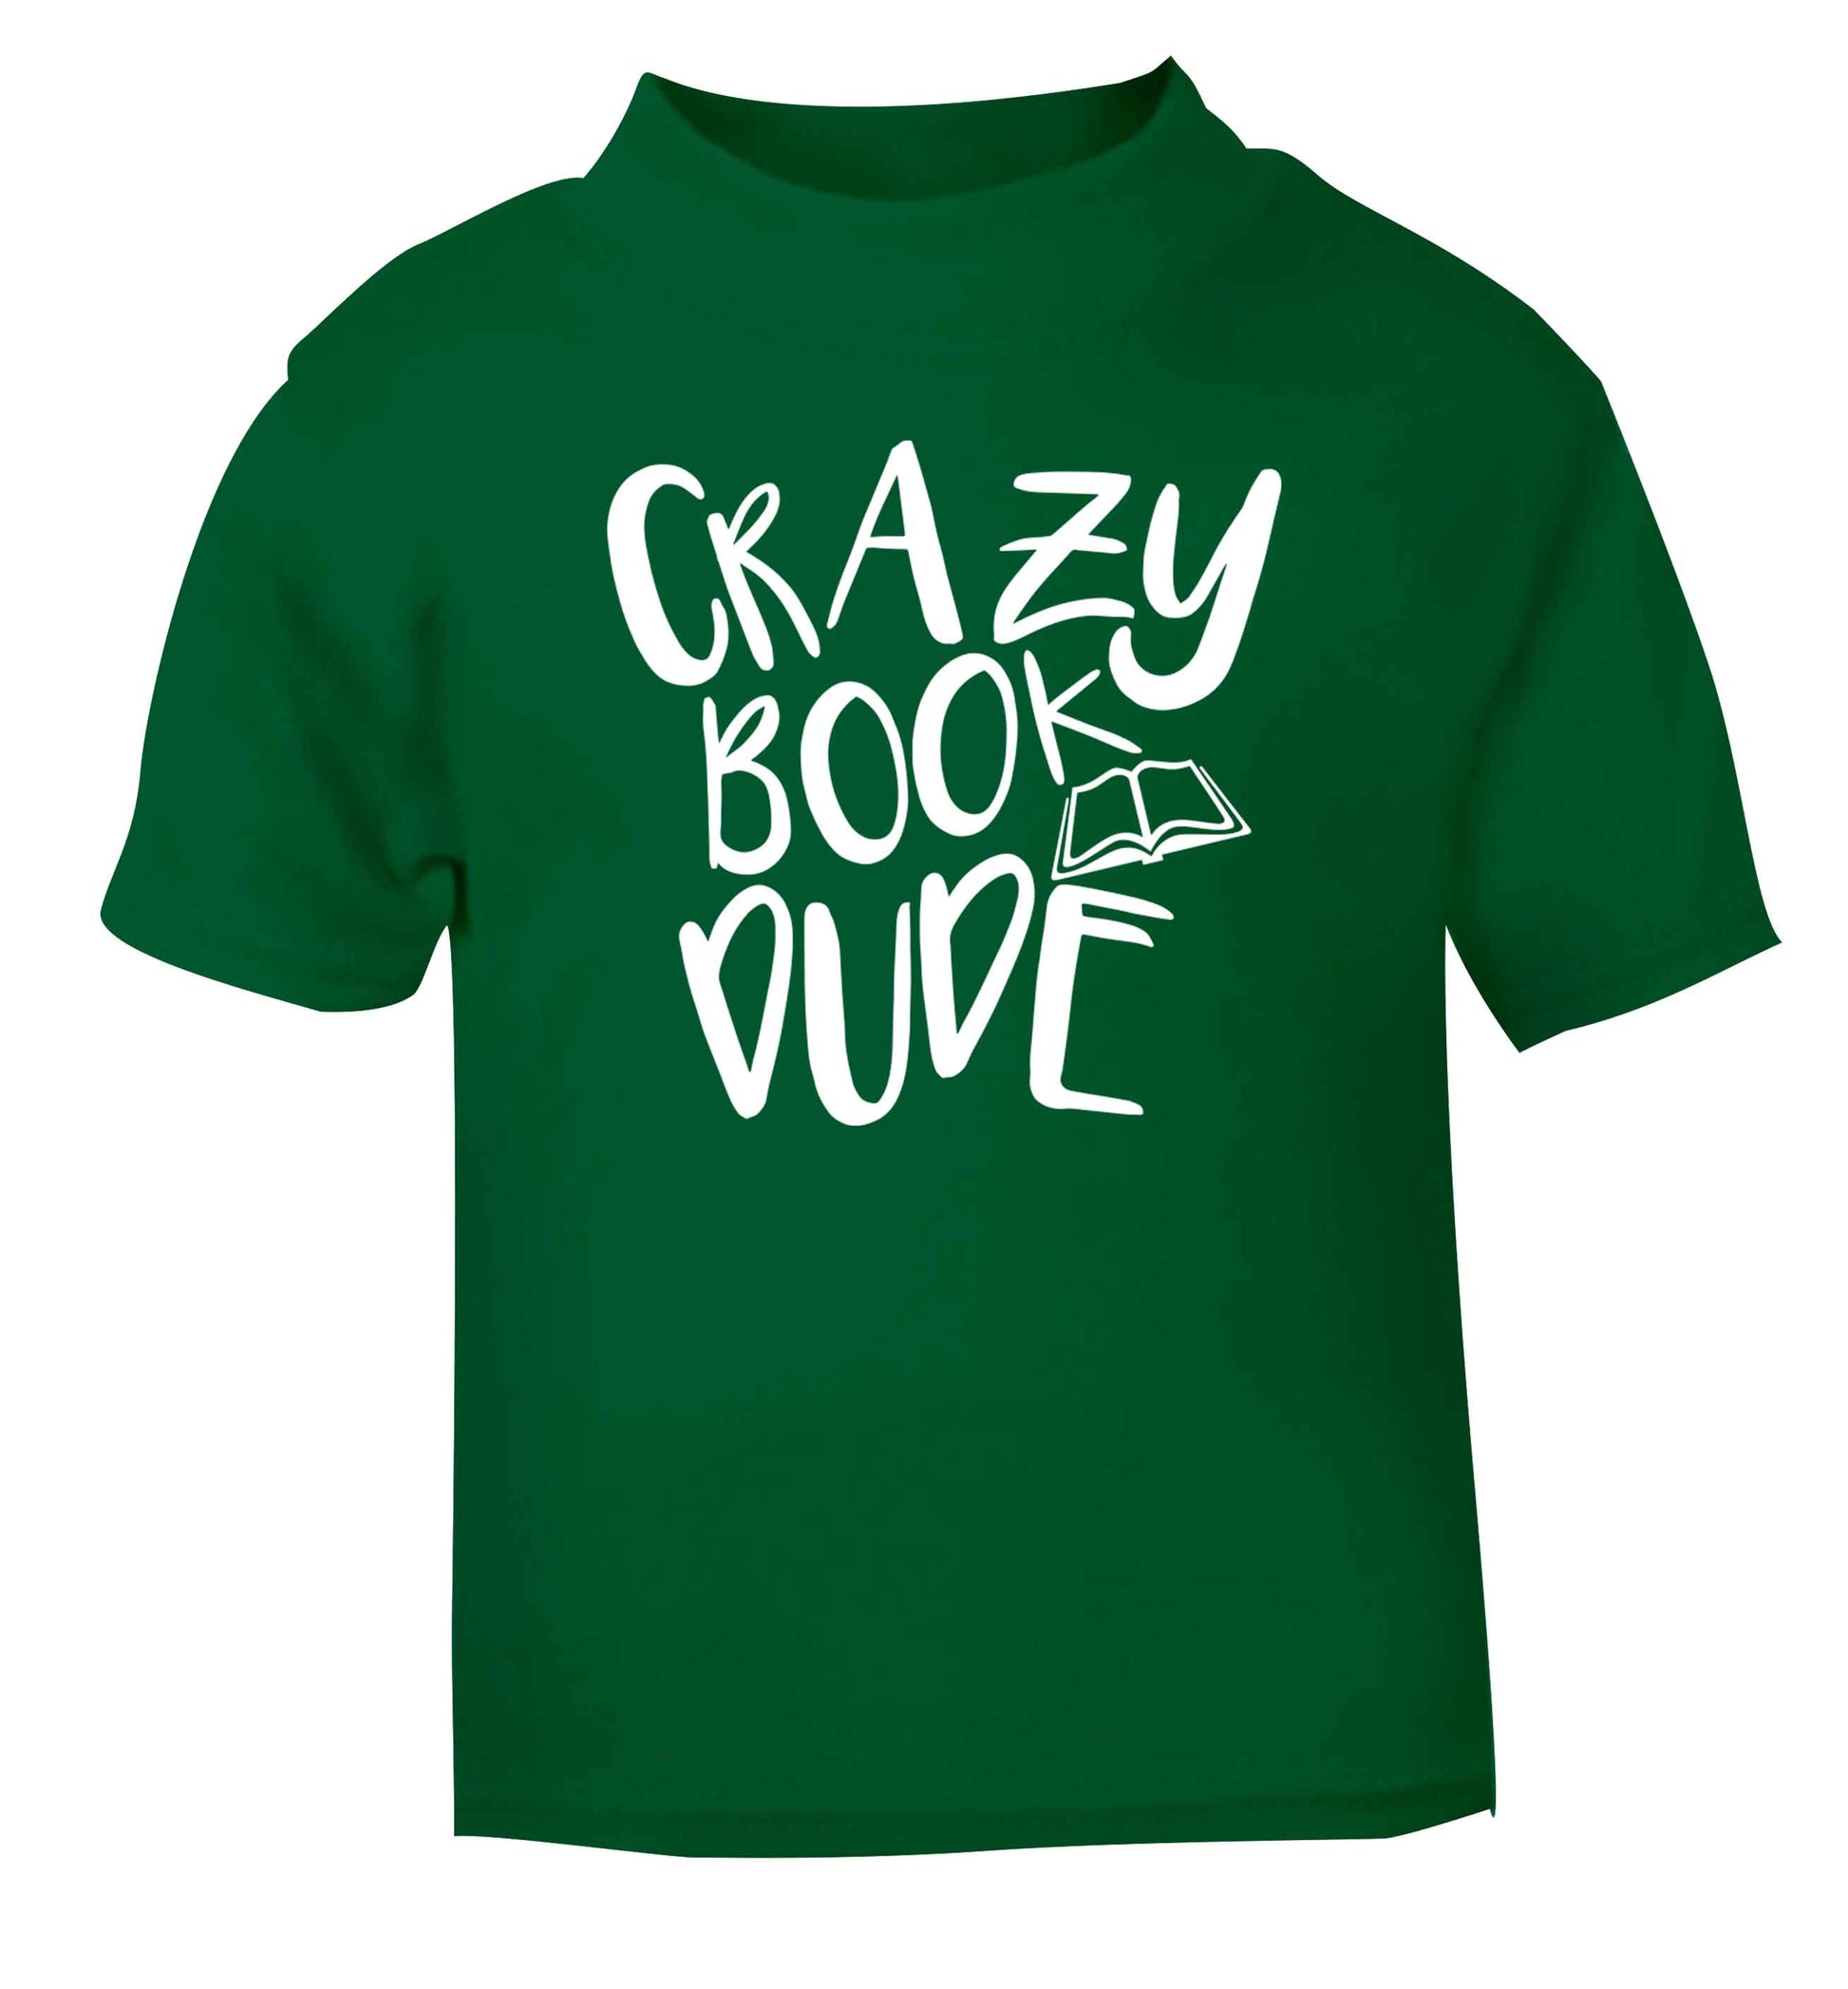 Crazy book dude green Baby Toddler Tshirt 2 Years